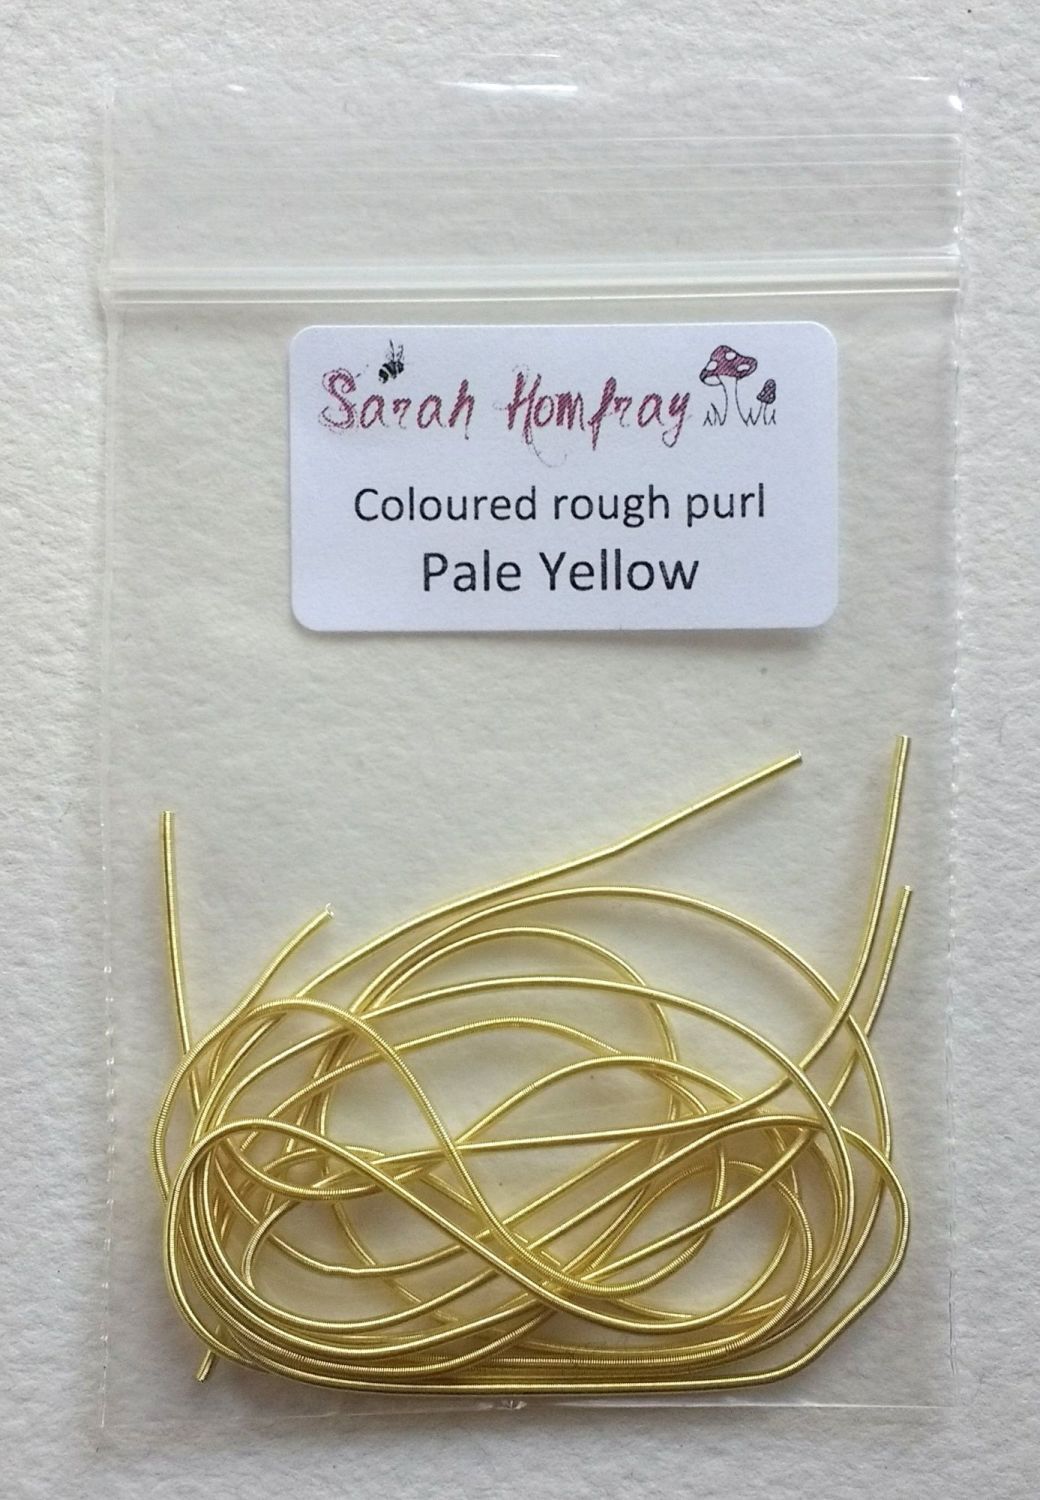 NEW! Coloured Rough purl no.6 - Pale Yellow